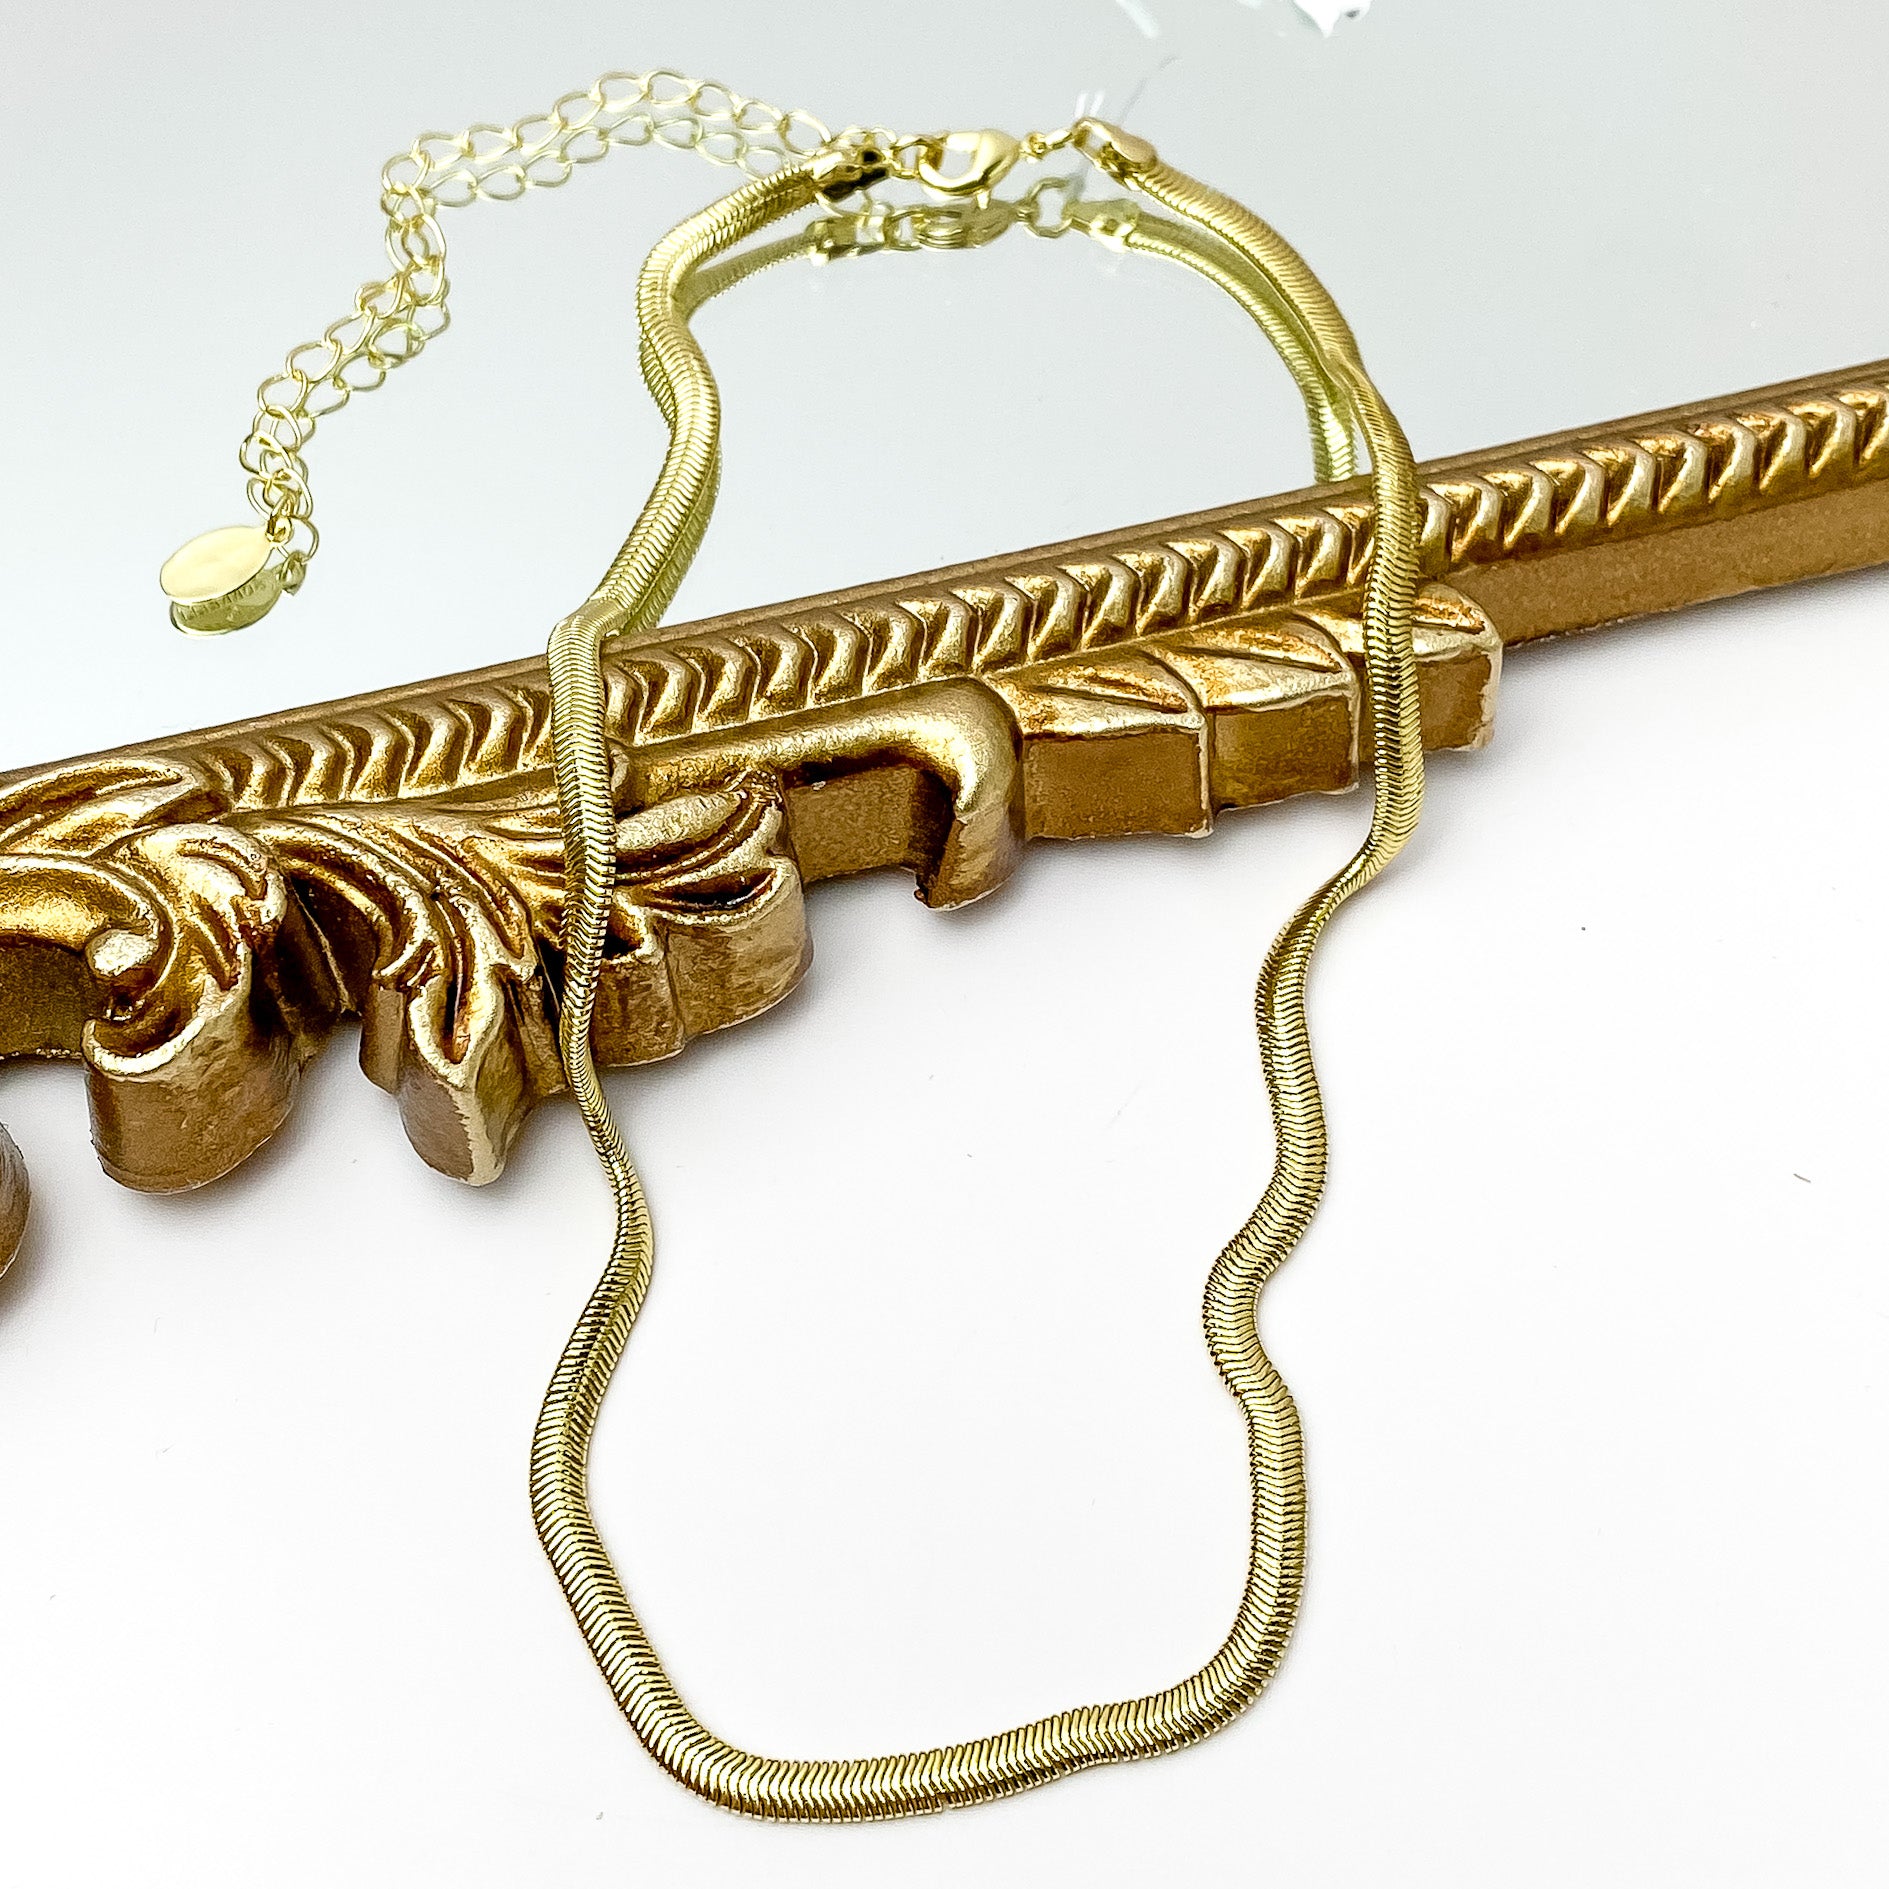 Gold herringbone chain necklace. This necklace is pictured laying partially on a gold mirror on a white background.   